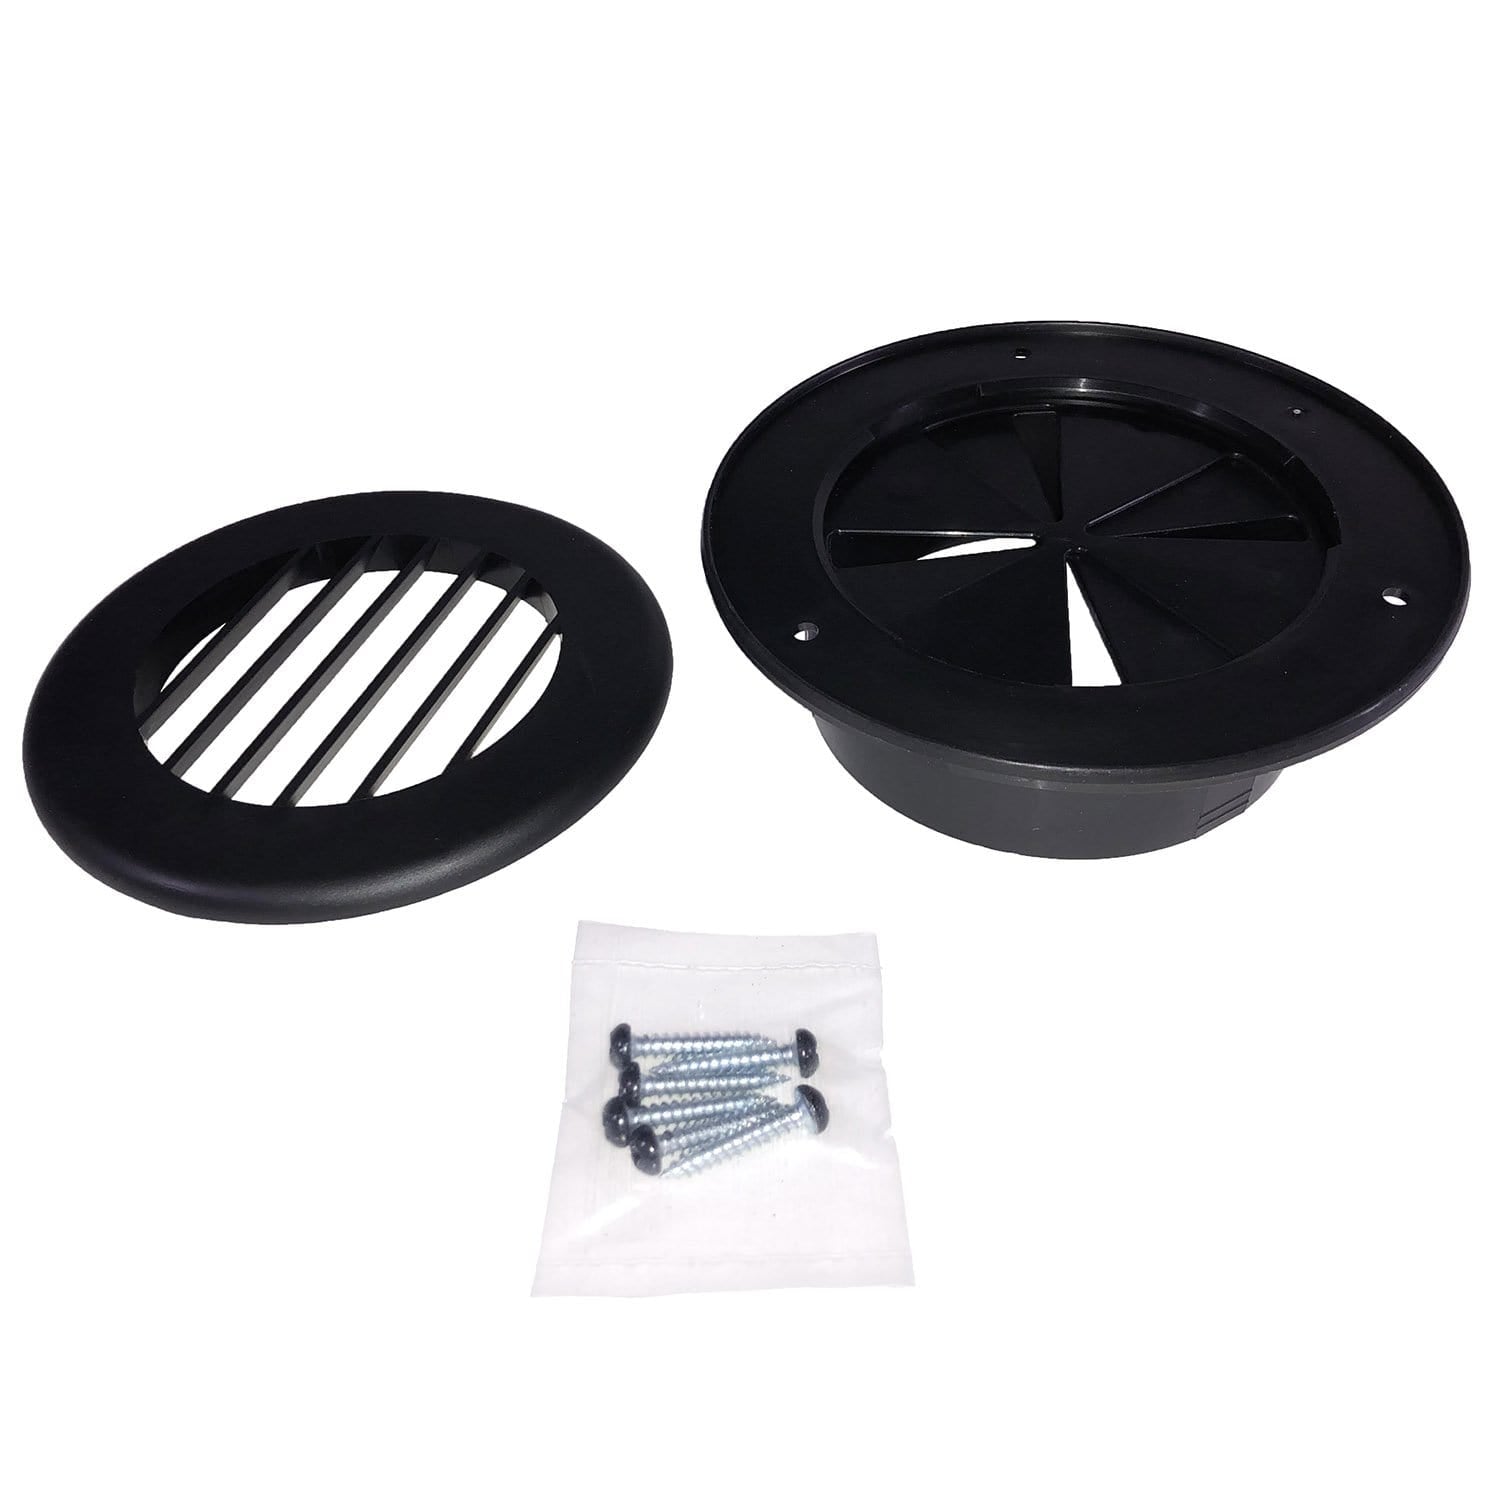 Thetford 94268 (601-015-94268) B&B Molders 4" Thermovent Ducted Heat Vent & Damper, Black